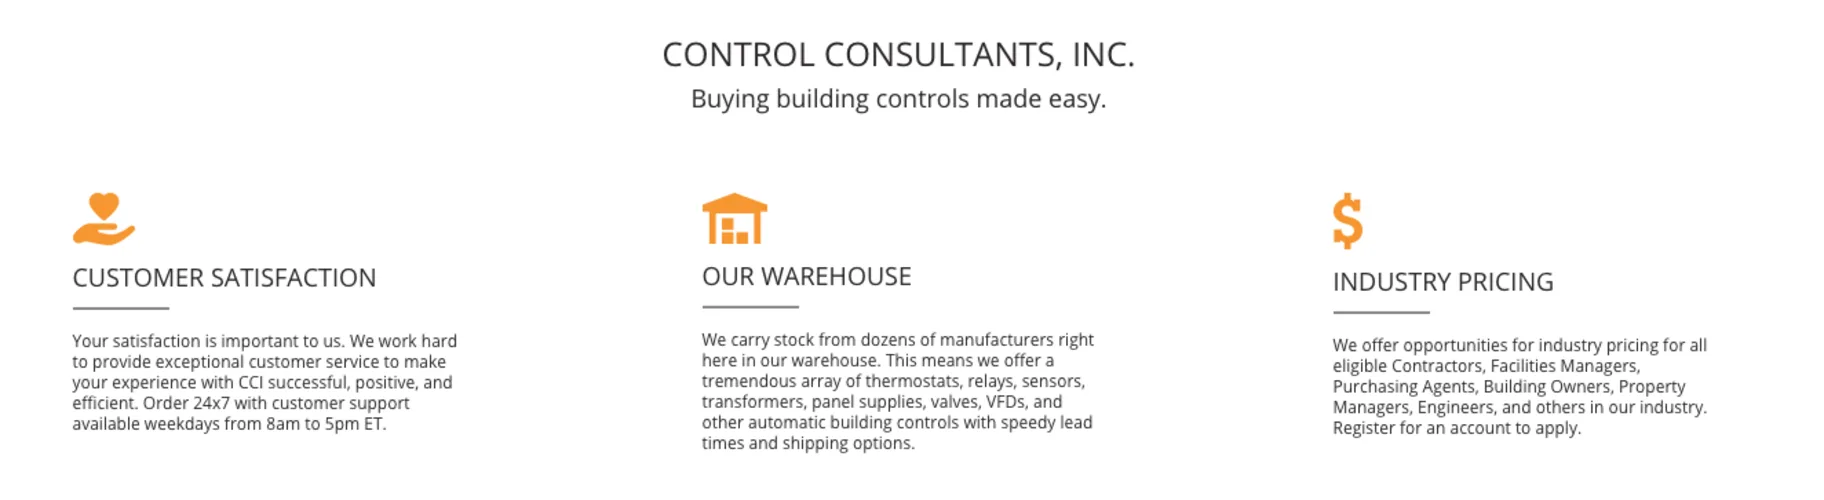 about control consultants inc.